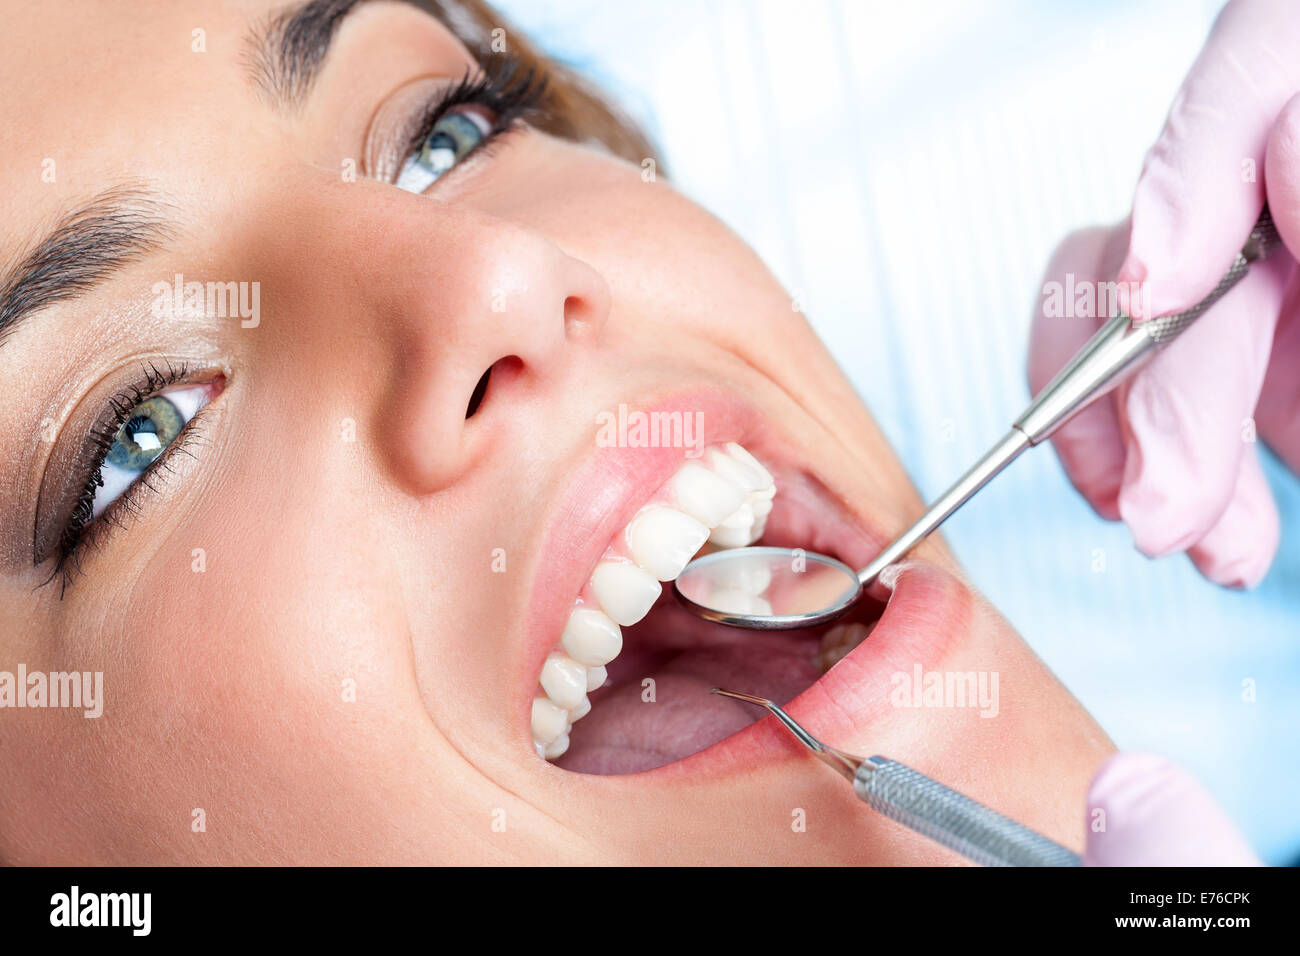 Extreme close up of beautiful young girl having dental check up. Stock Photo